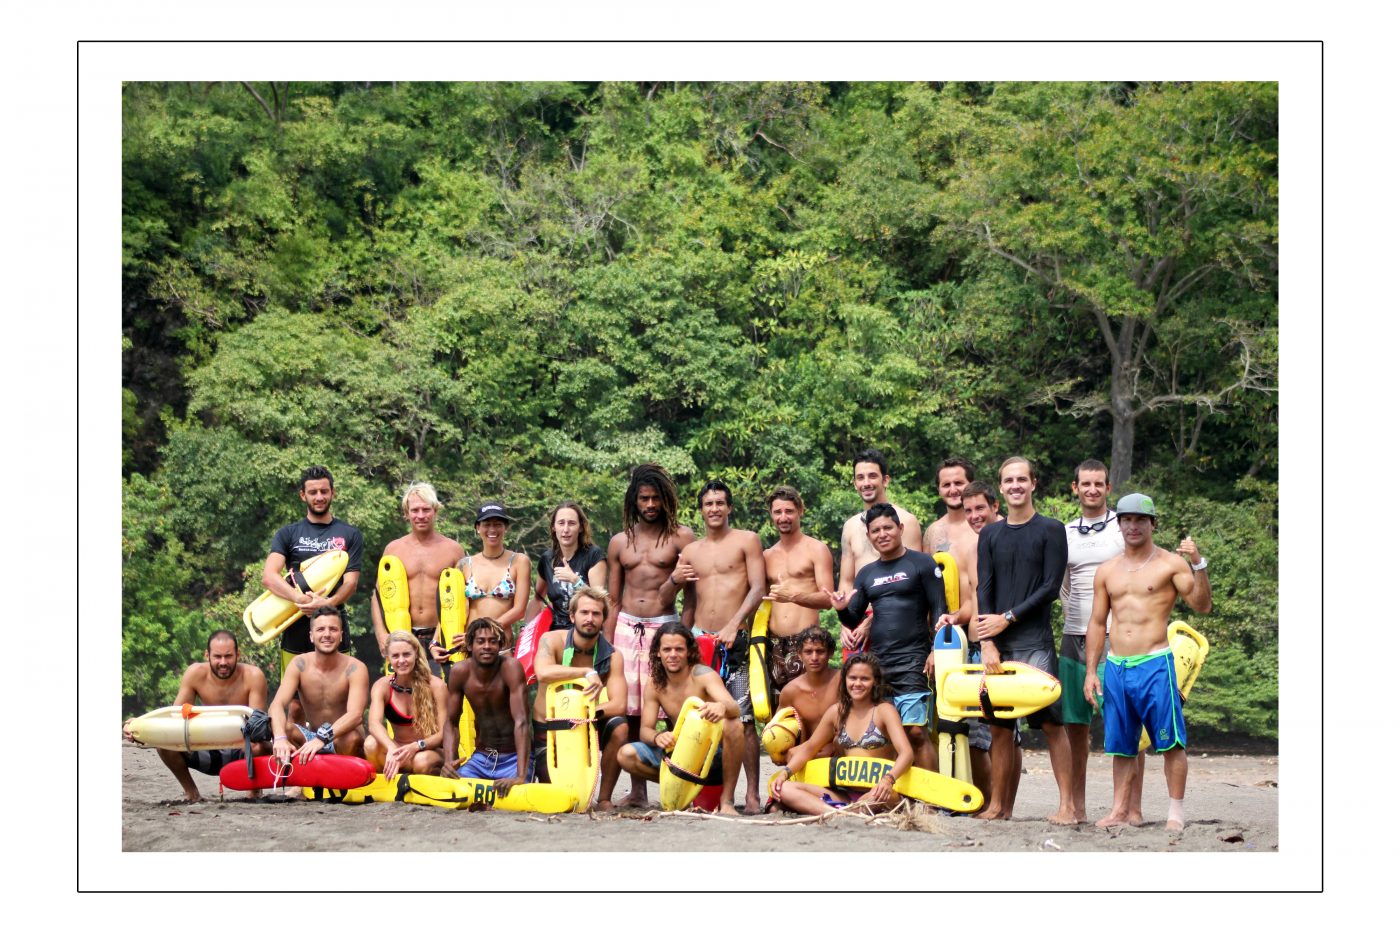 Instructors and students from Surf the Jungle Surf Camp. Photo courtesy of Surf the Jungle Costa Rica